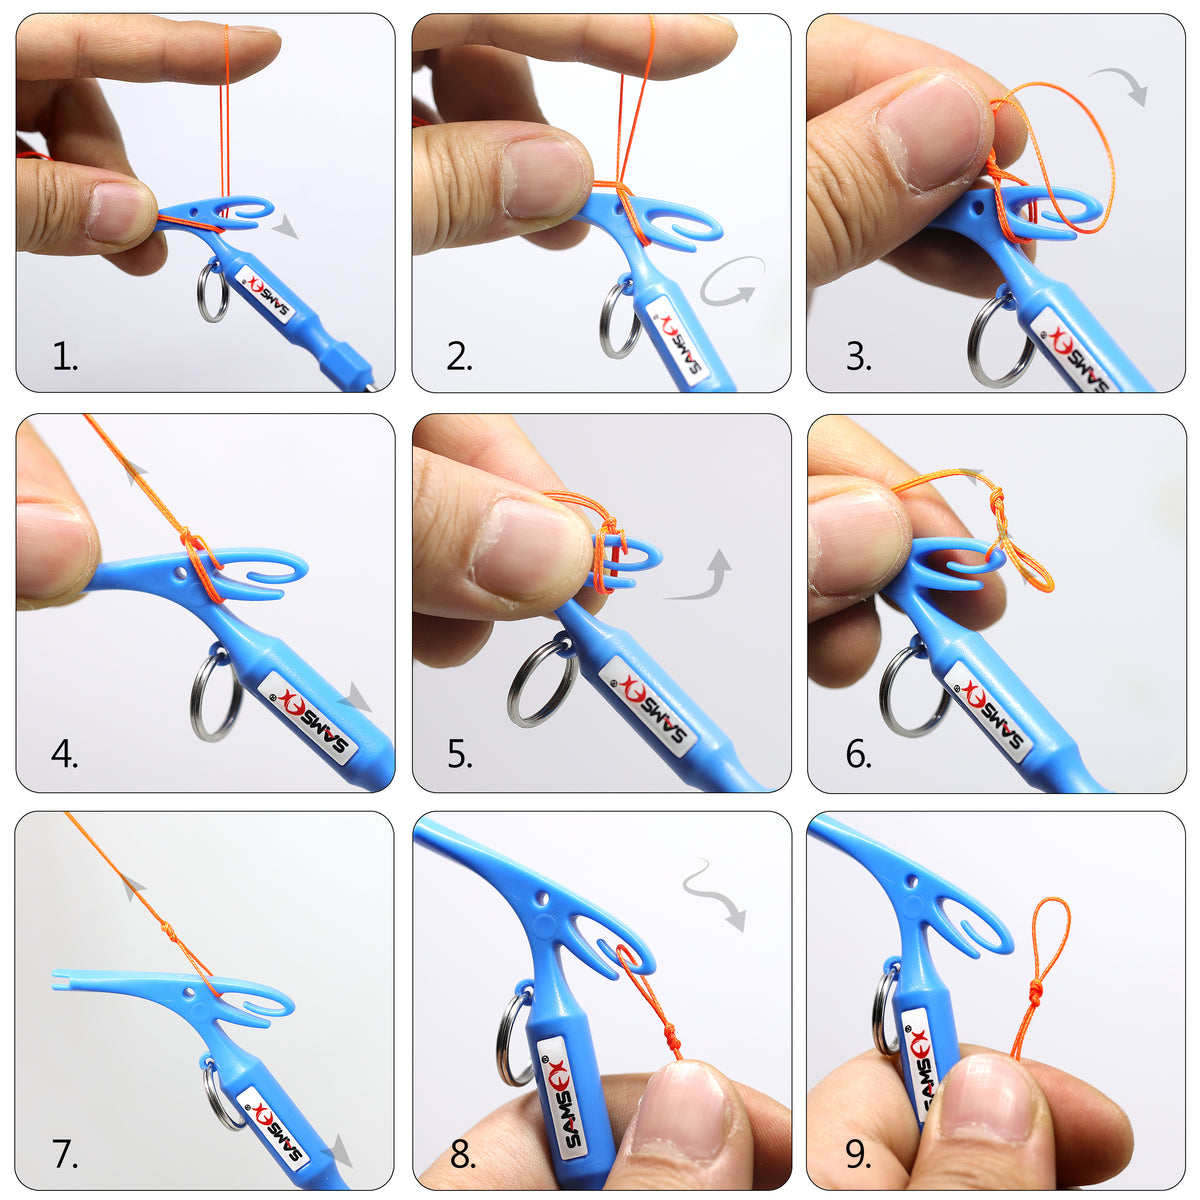 Fly Fishing Knot Tying Tool Kit 3 Quick Knot Tyers w/ Zinger Retractors